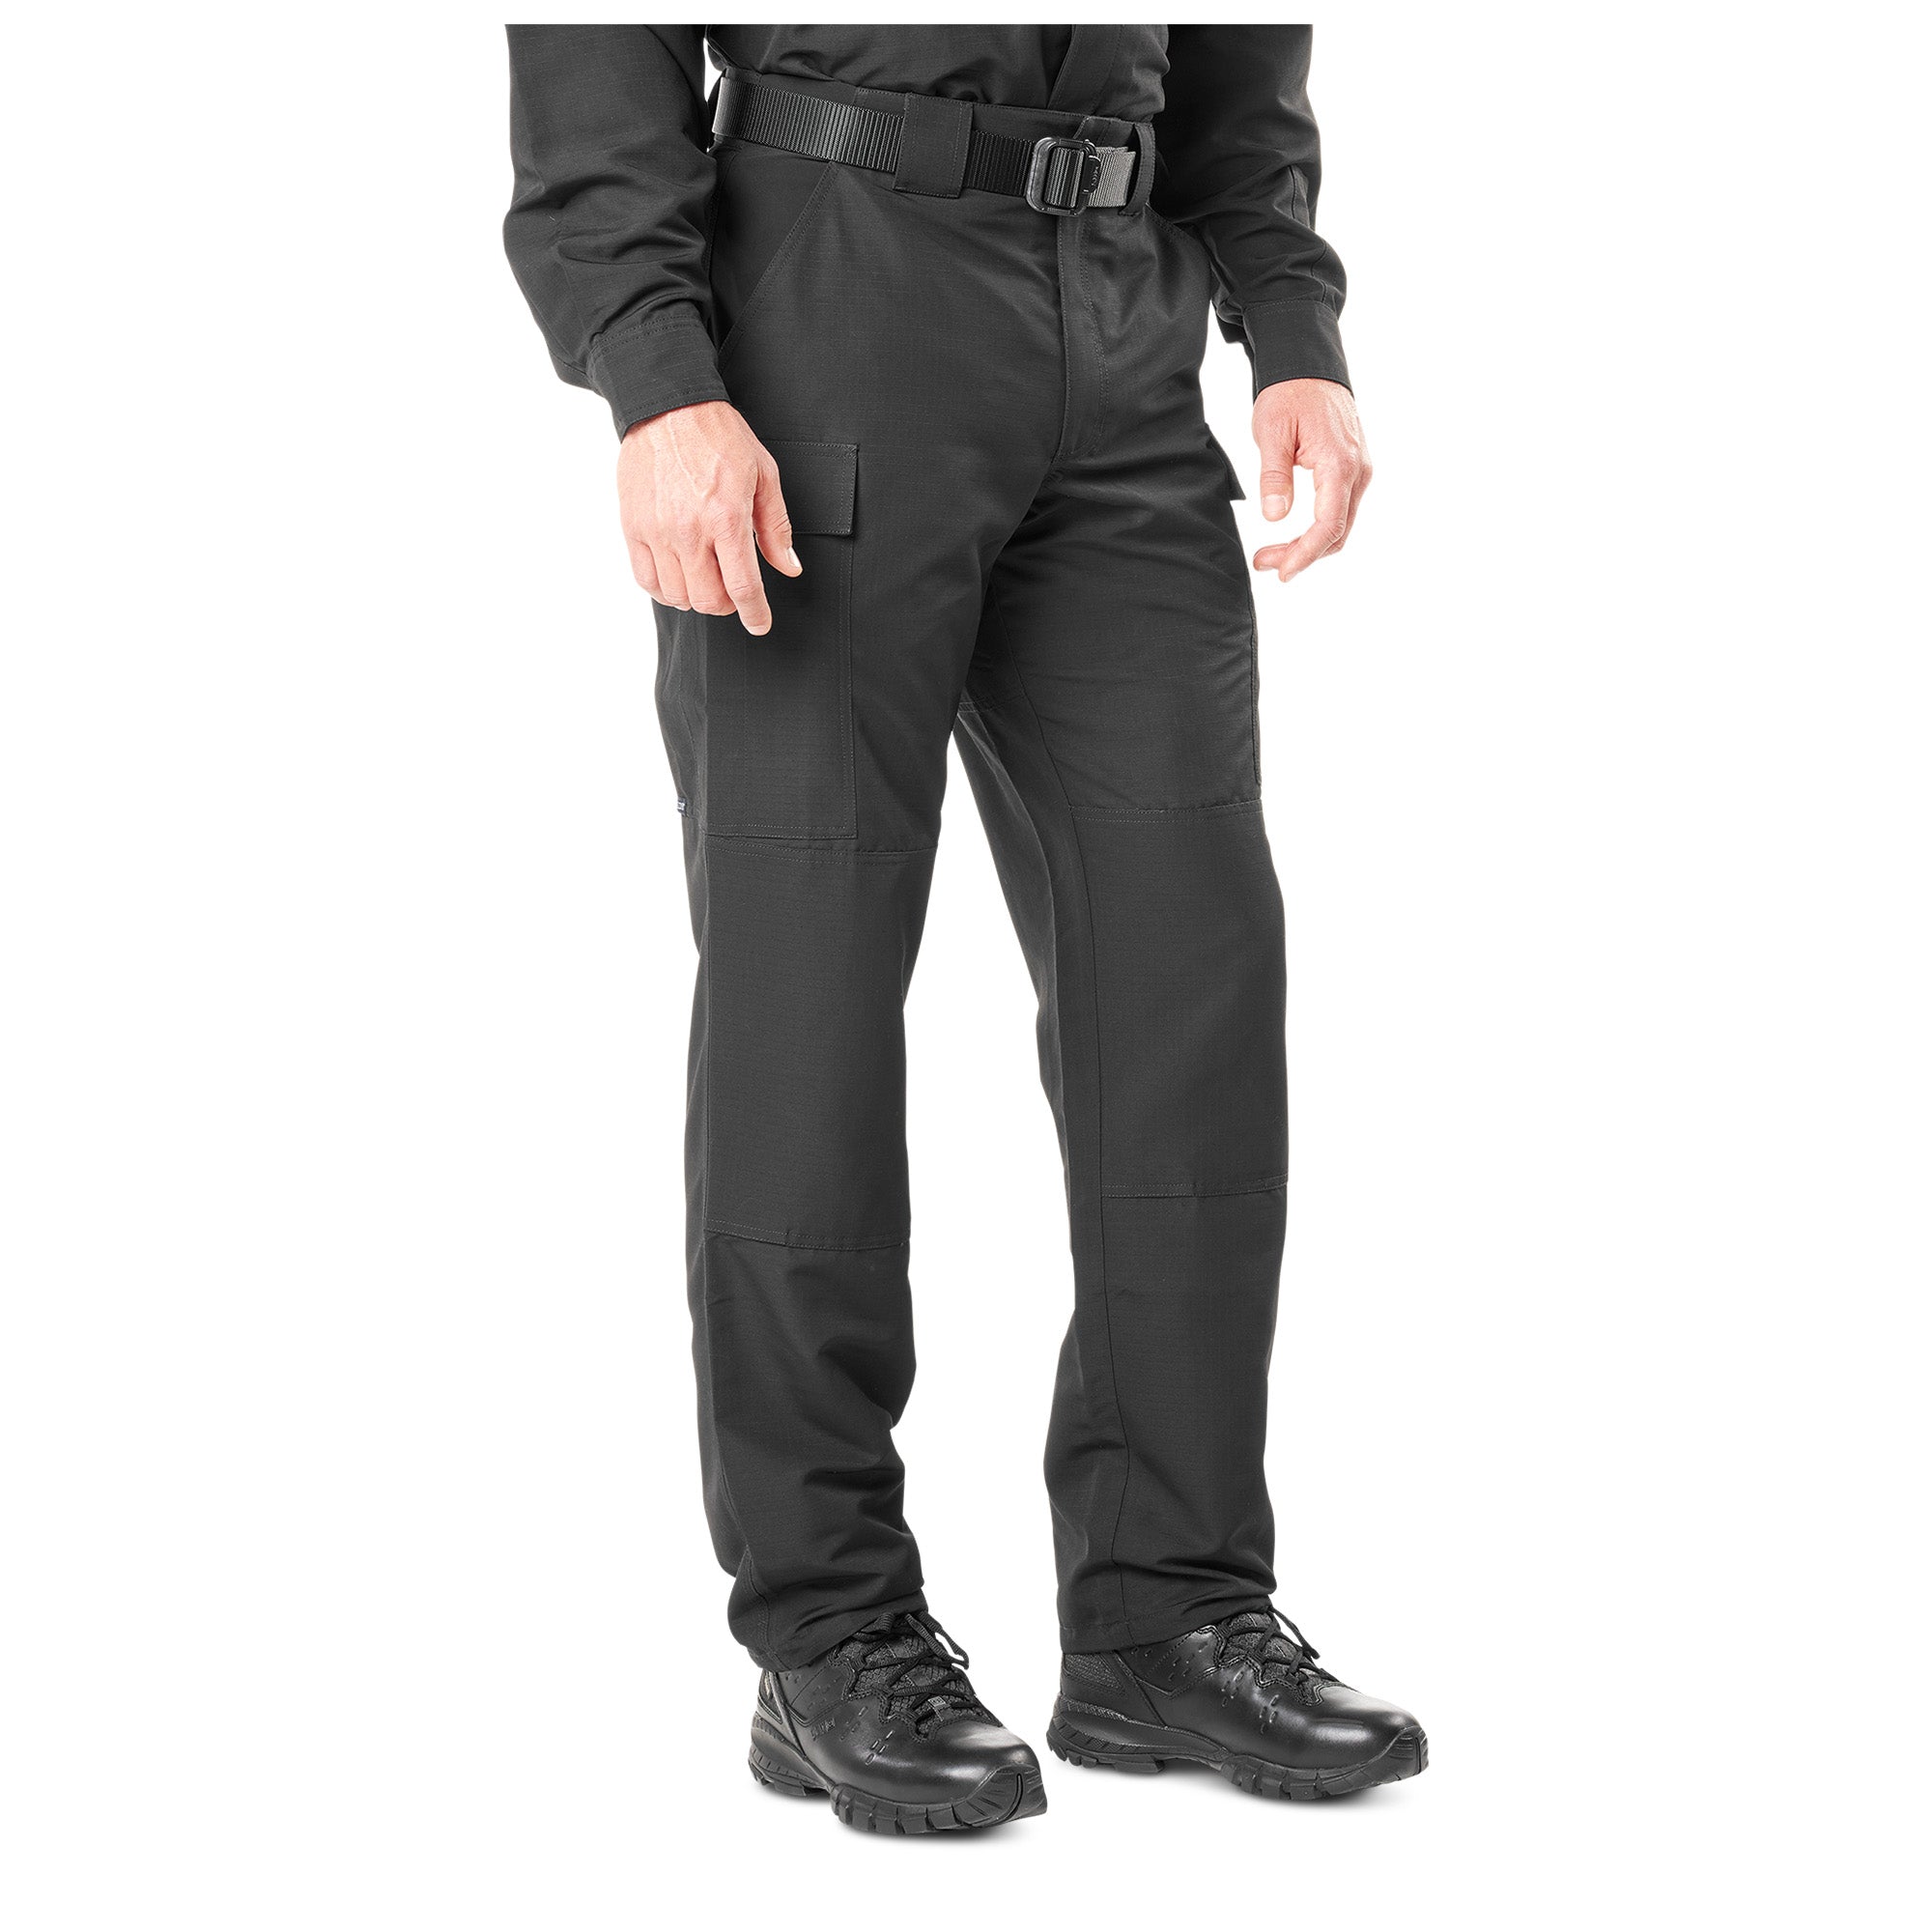 5.11 Tactical 5.11 Men's Stryke TDU High-Performance Tactical Pant, Two Way  Mechanical Stretch, Style 74433, Dark Navy, 46-Waist/30-Length 